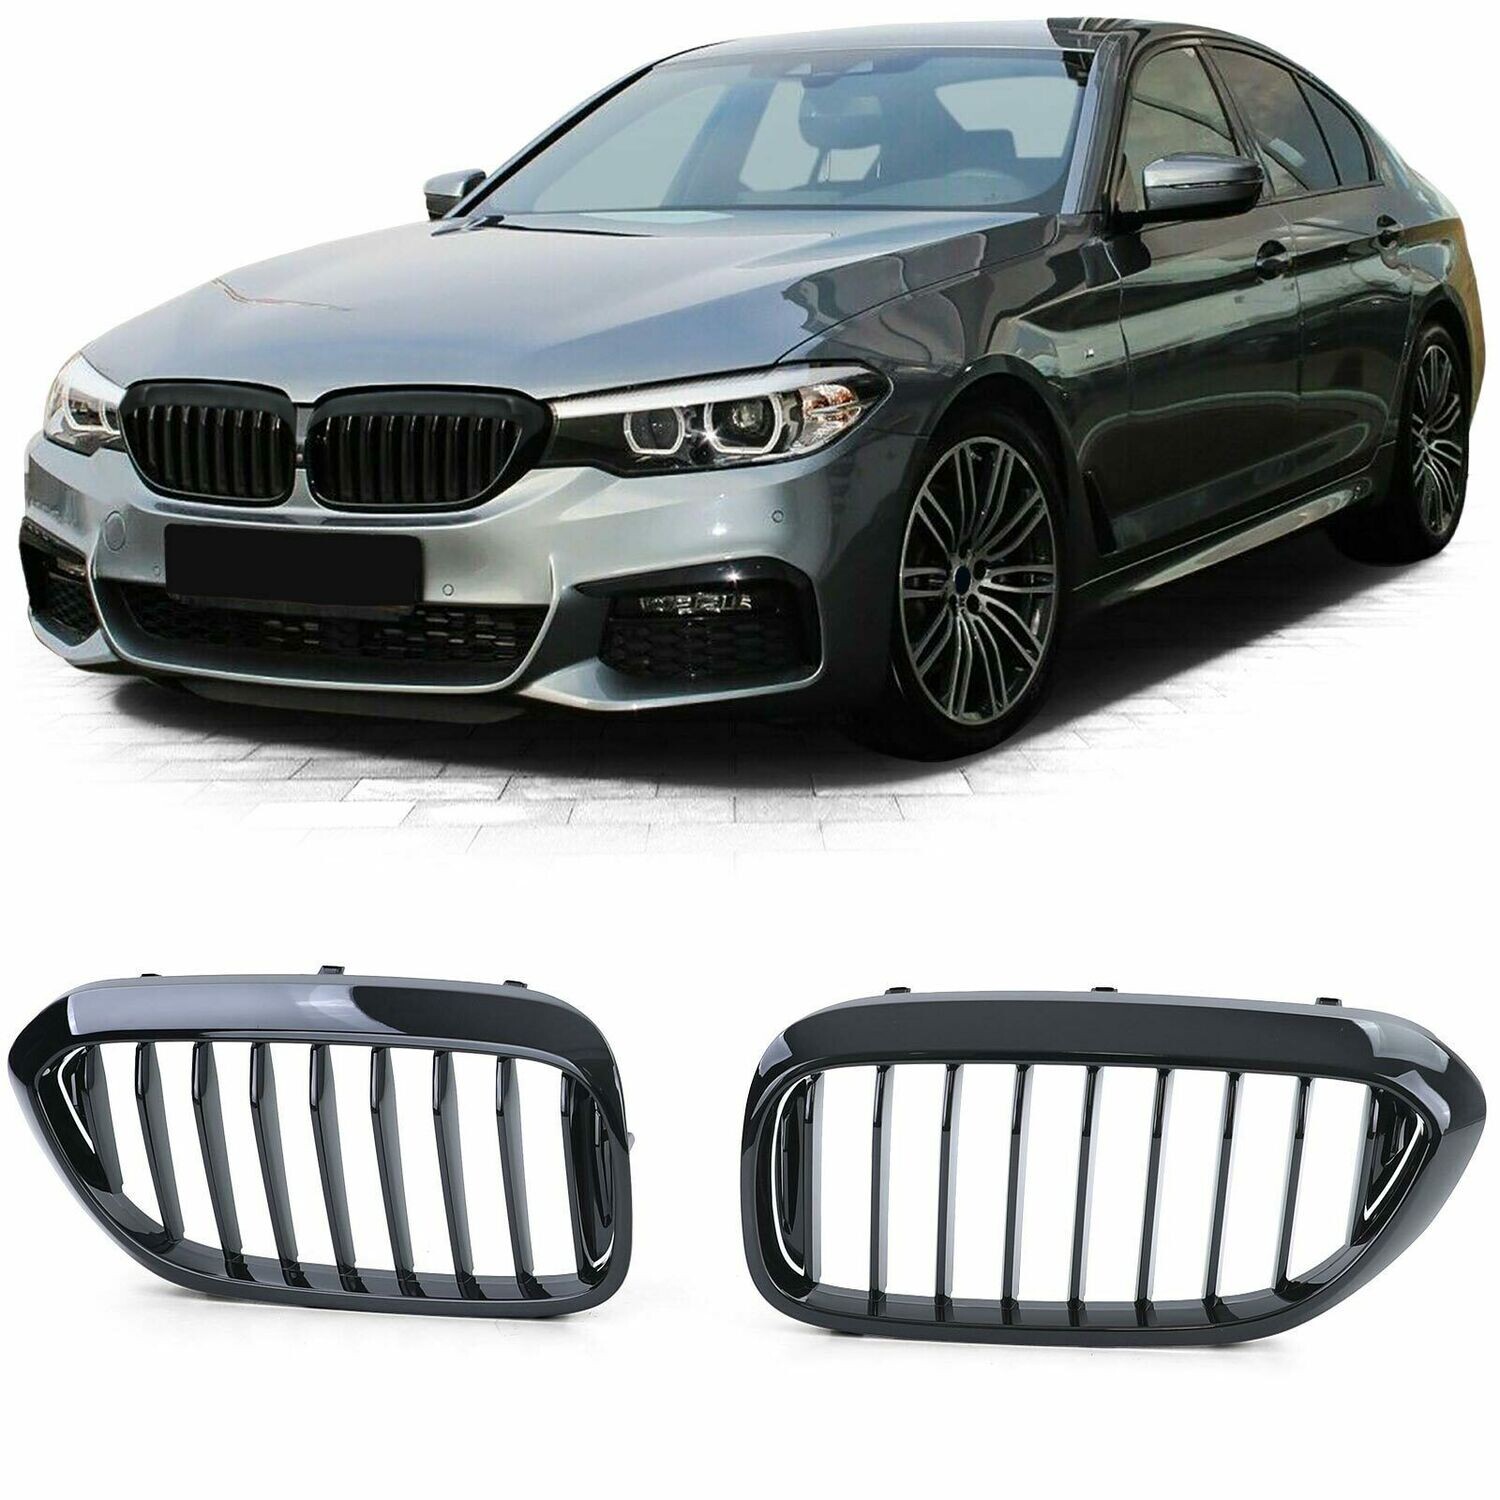 Sport Grill BLACK GLOSS for BMW G30 G31 G32 17-20 SPORT LOOK